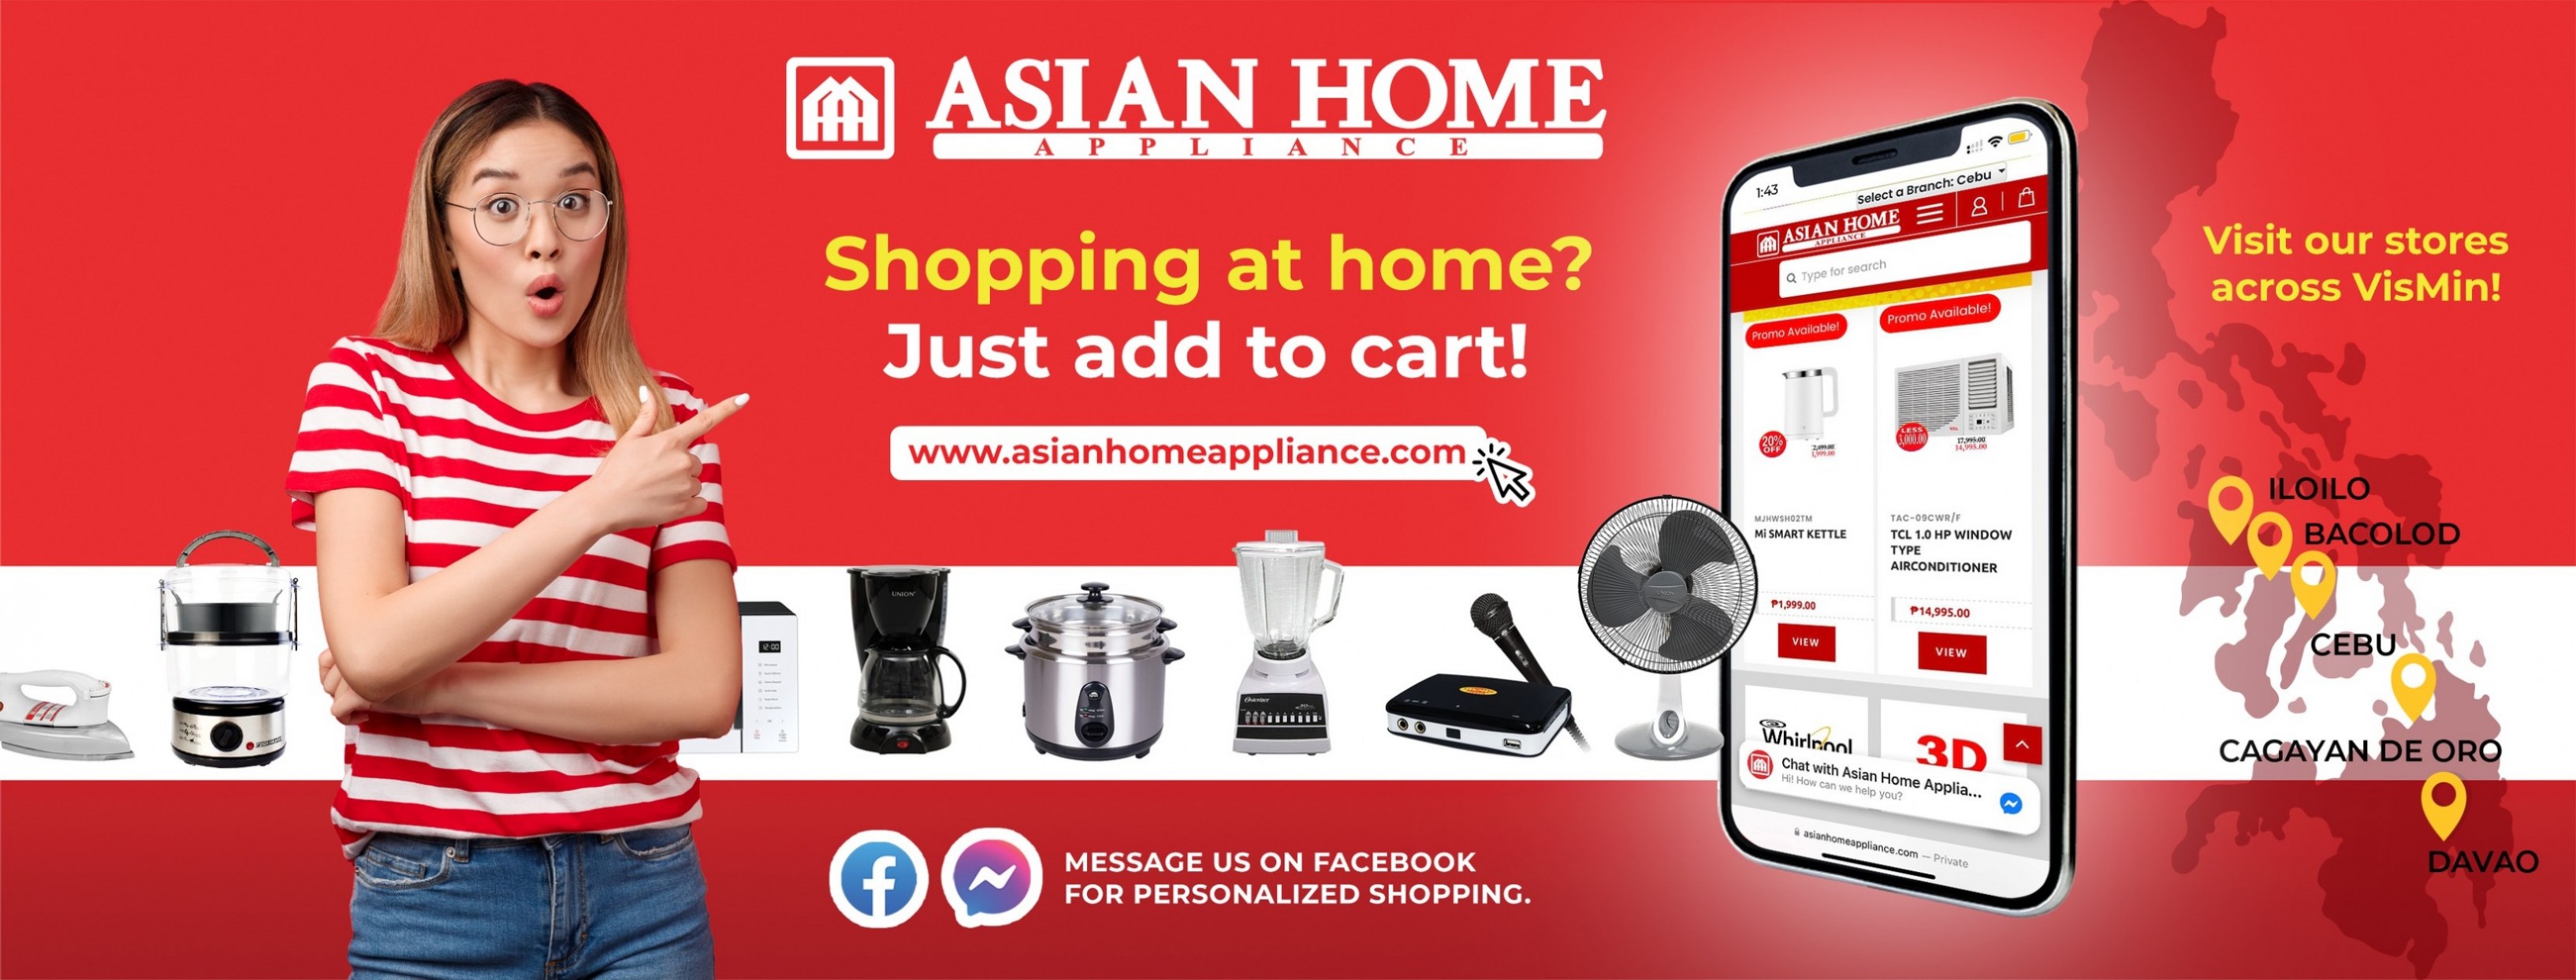 Asian Home Appliance